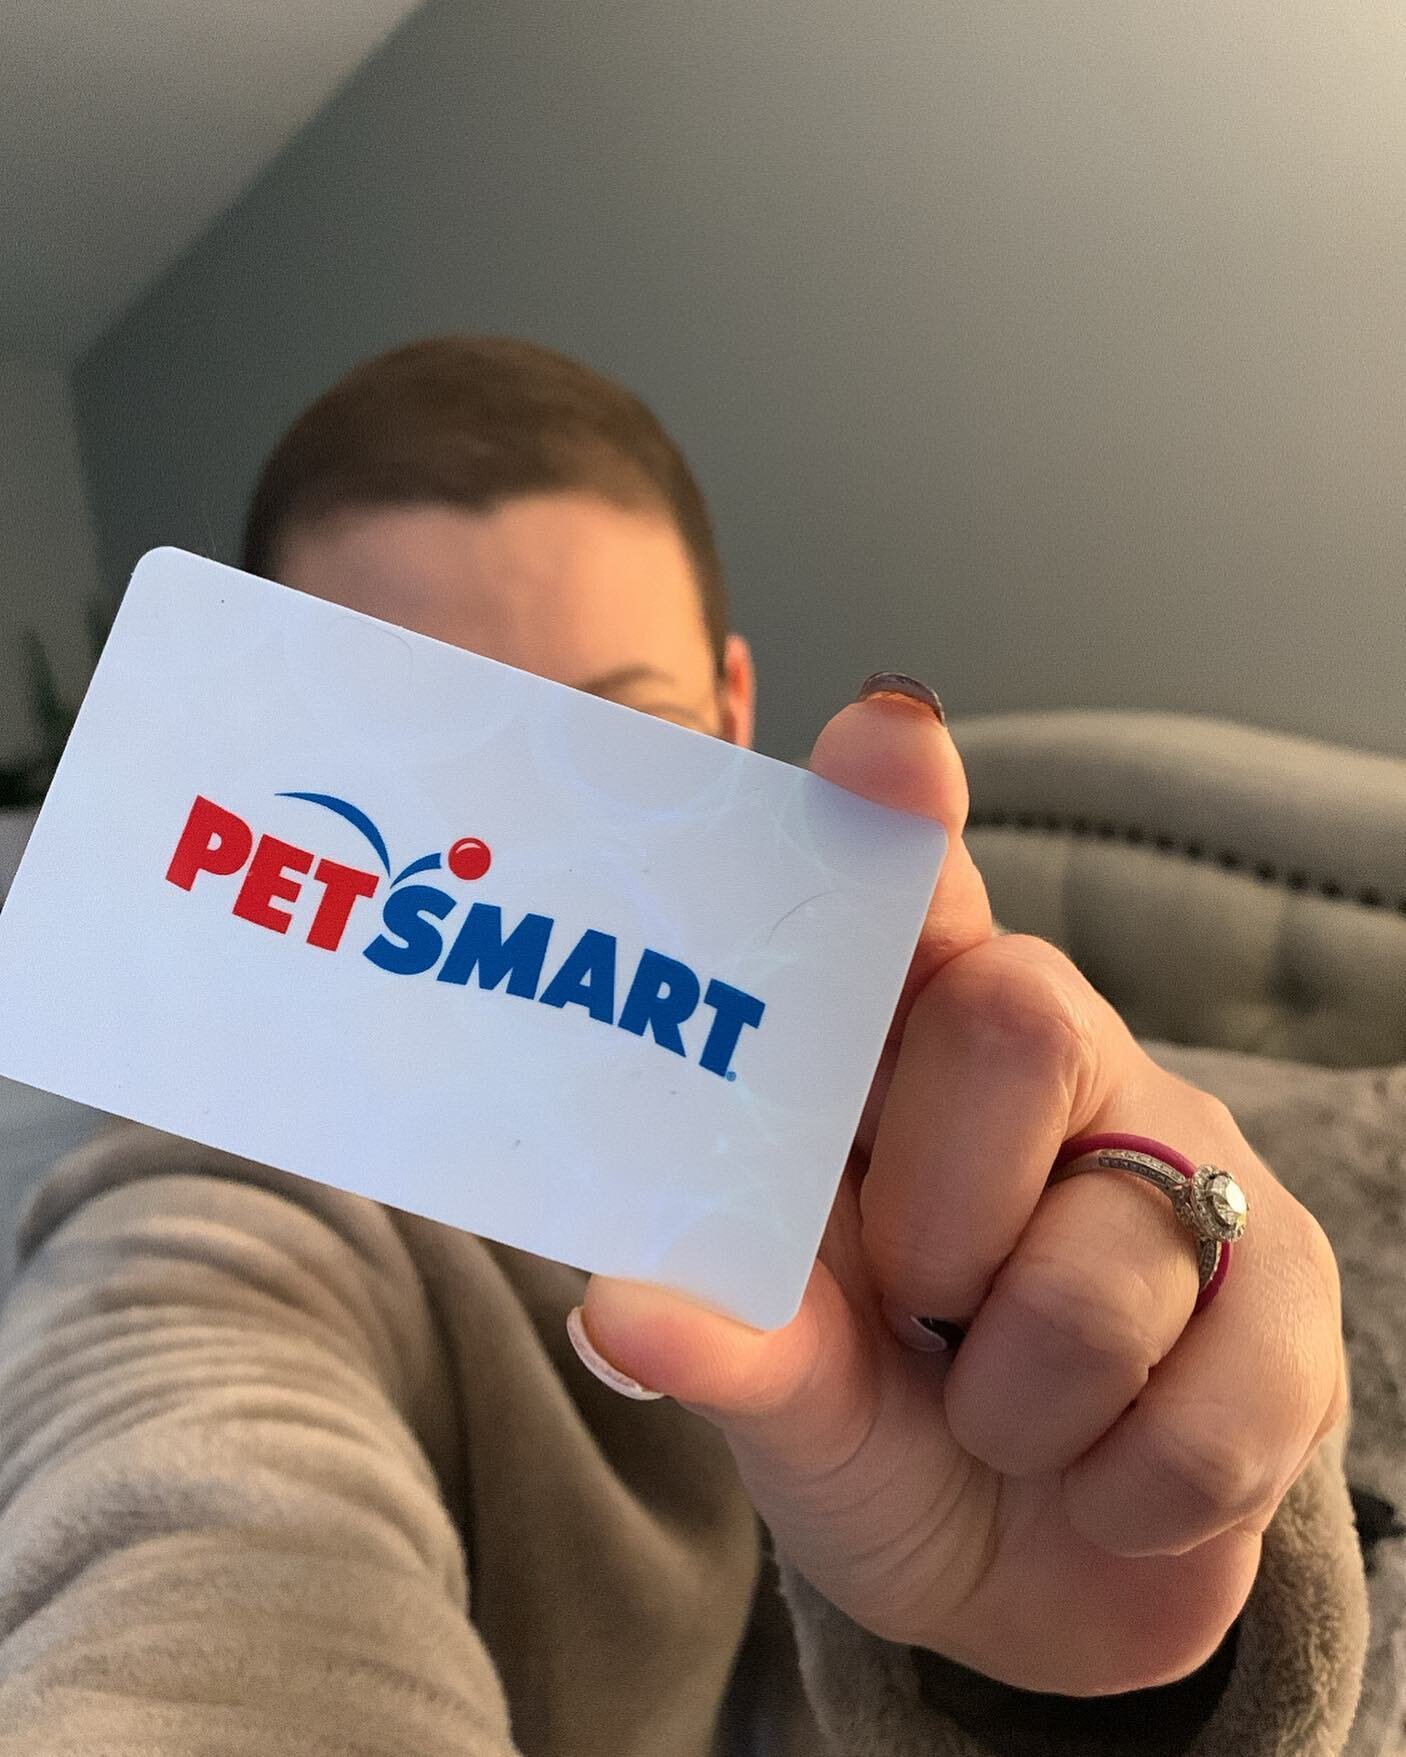 Who doesn&rsquo;t love a giveaway? We have a $25 gift card to @petsmart I&rsquo;d love to give to one of you. 
 
Here are the deets 🔽🔽
🐶 Like and share this post 
🐶 Like one other random photo on my page
🐶 Guess a number between 1-500

I will ge